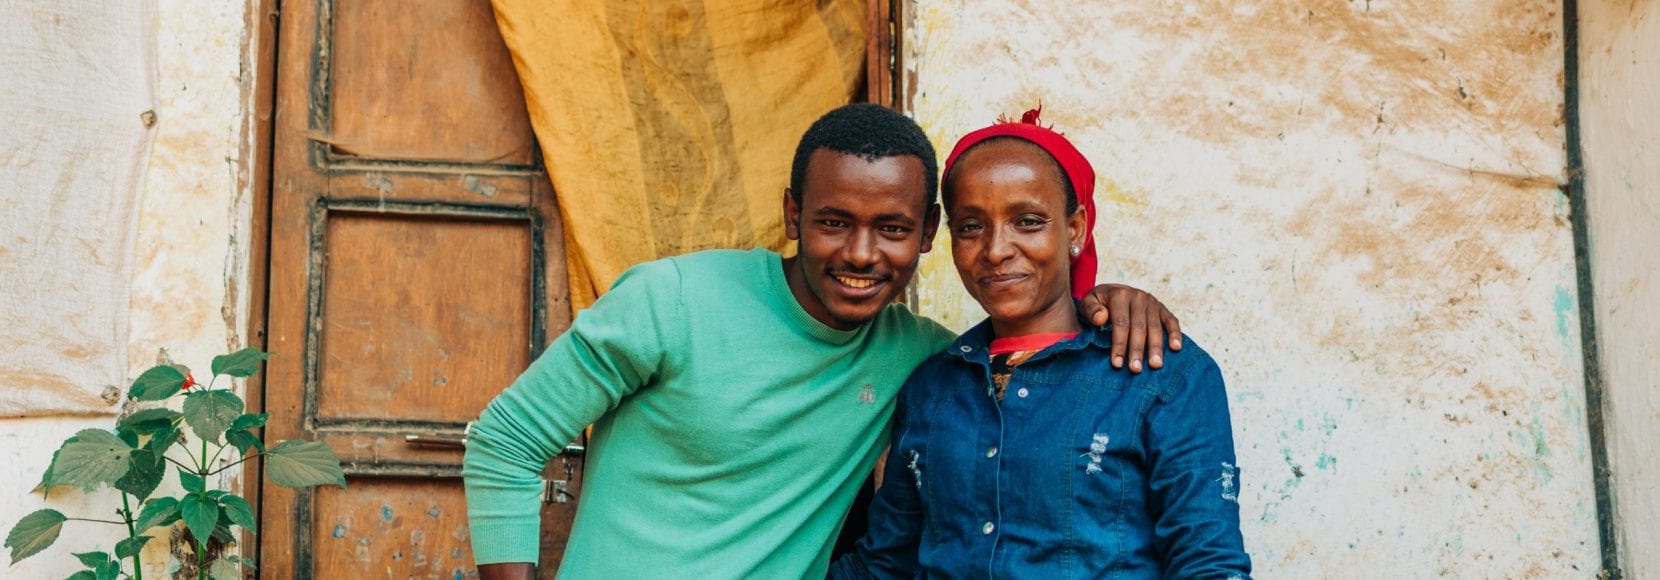 The impact of coffee has transformed what life looks like for Lubaba and her son smiling in front of their home